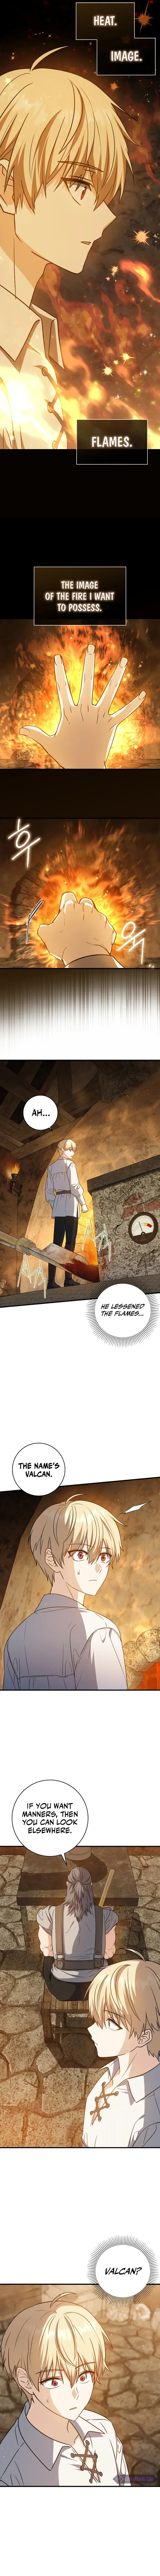 The Reincarnated Assassin is a Genius Swordsman Chapter 20 - Page 7